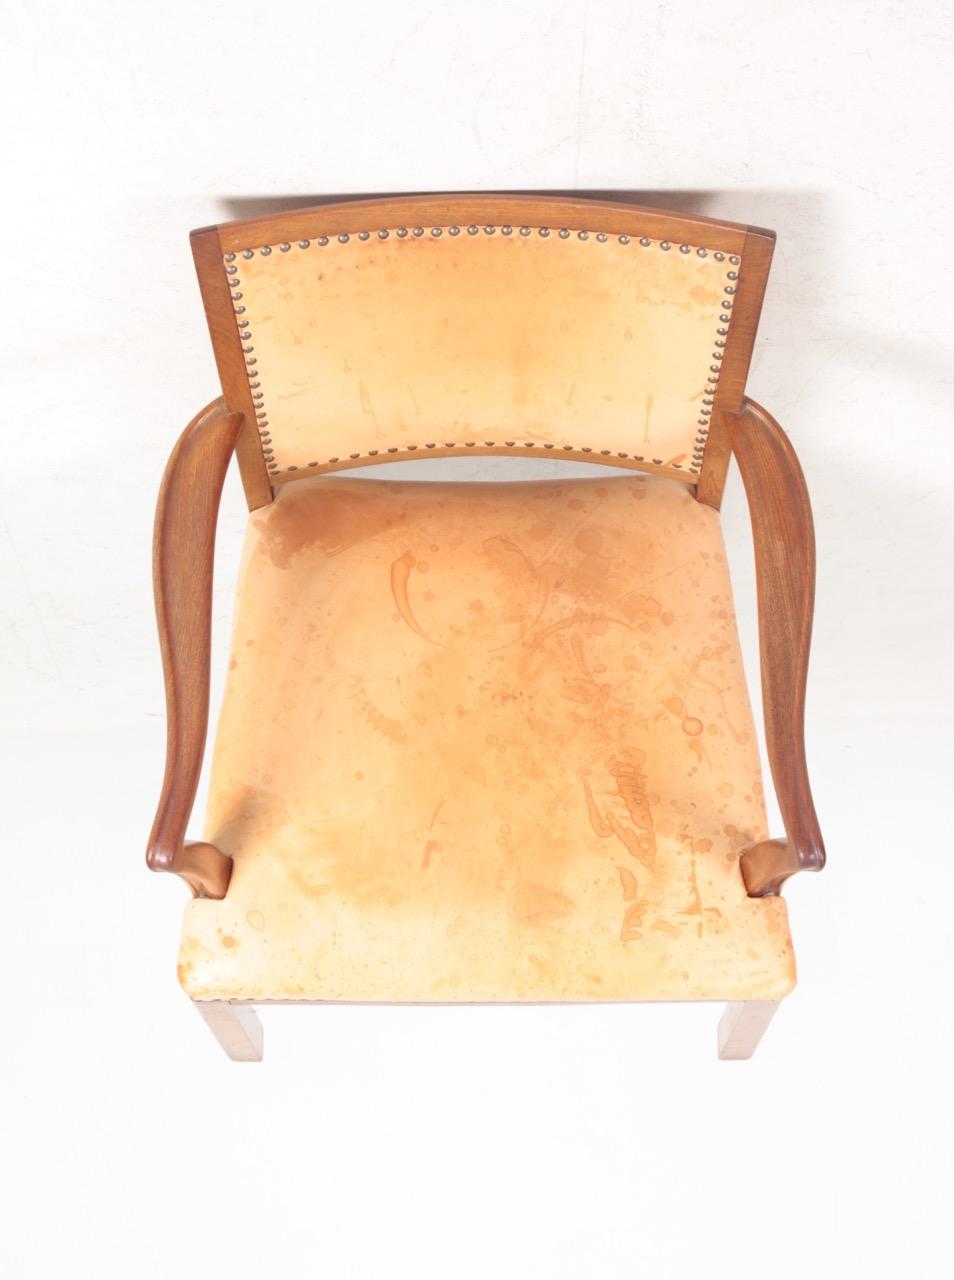 Midcentury Armchair in Patinated Leather, Danish Design, 1950s For Sale 4